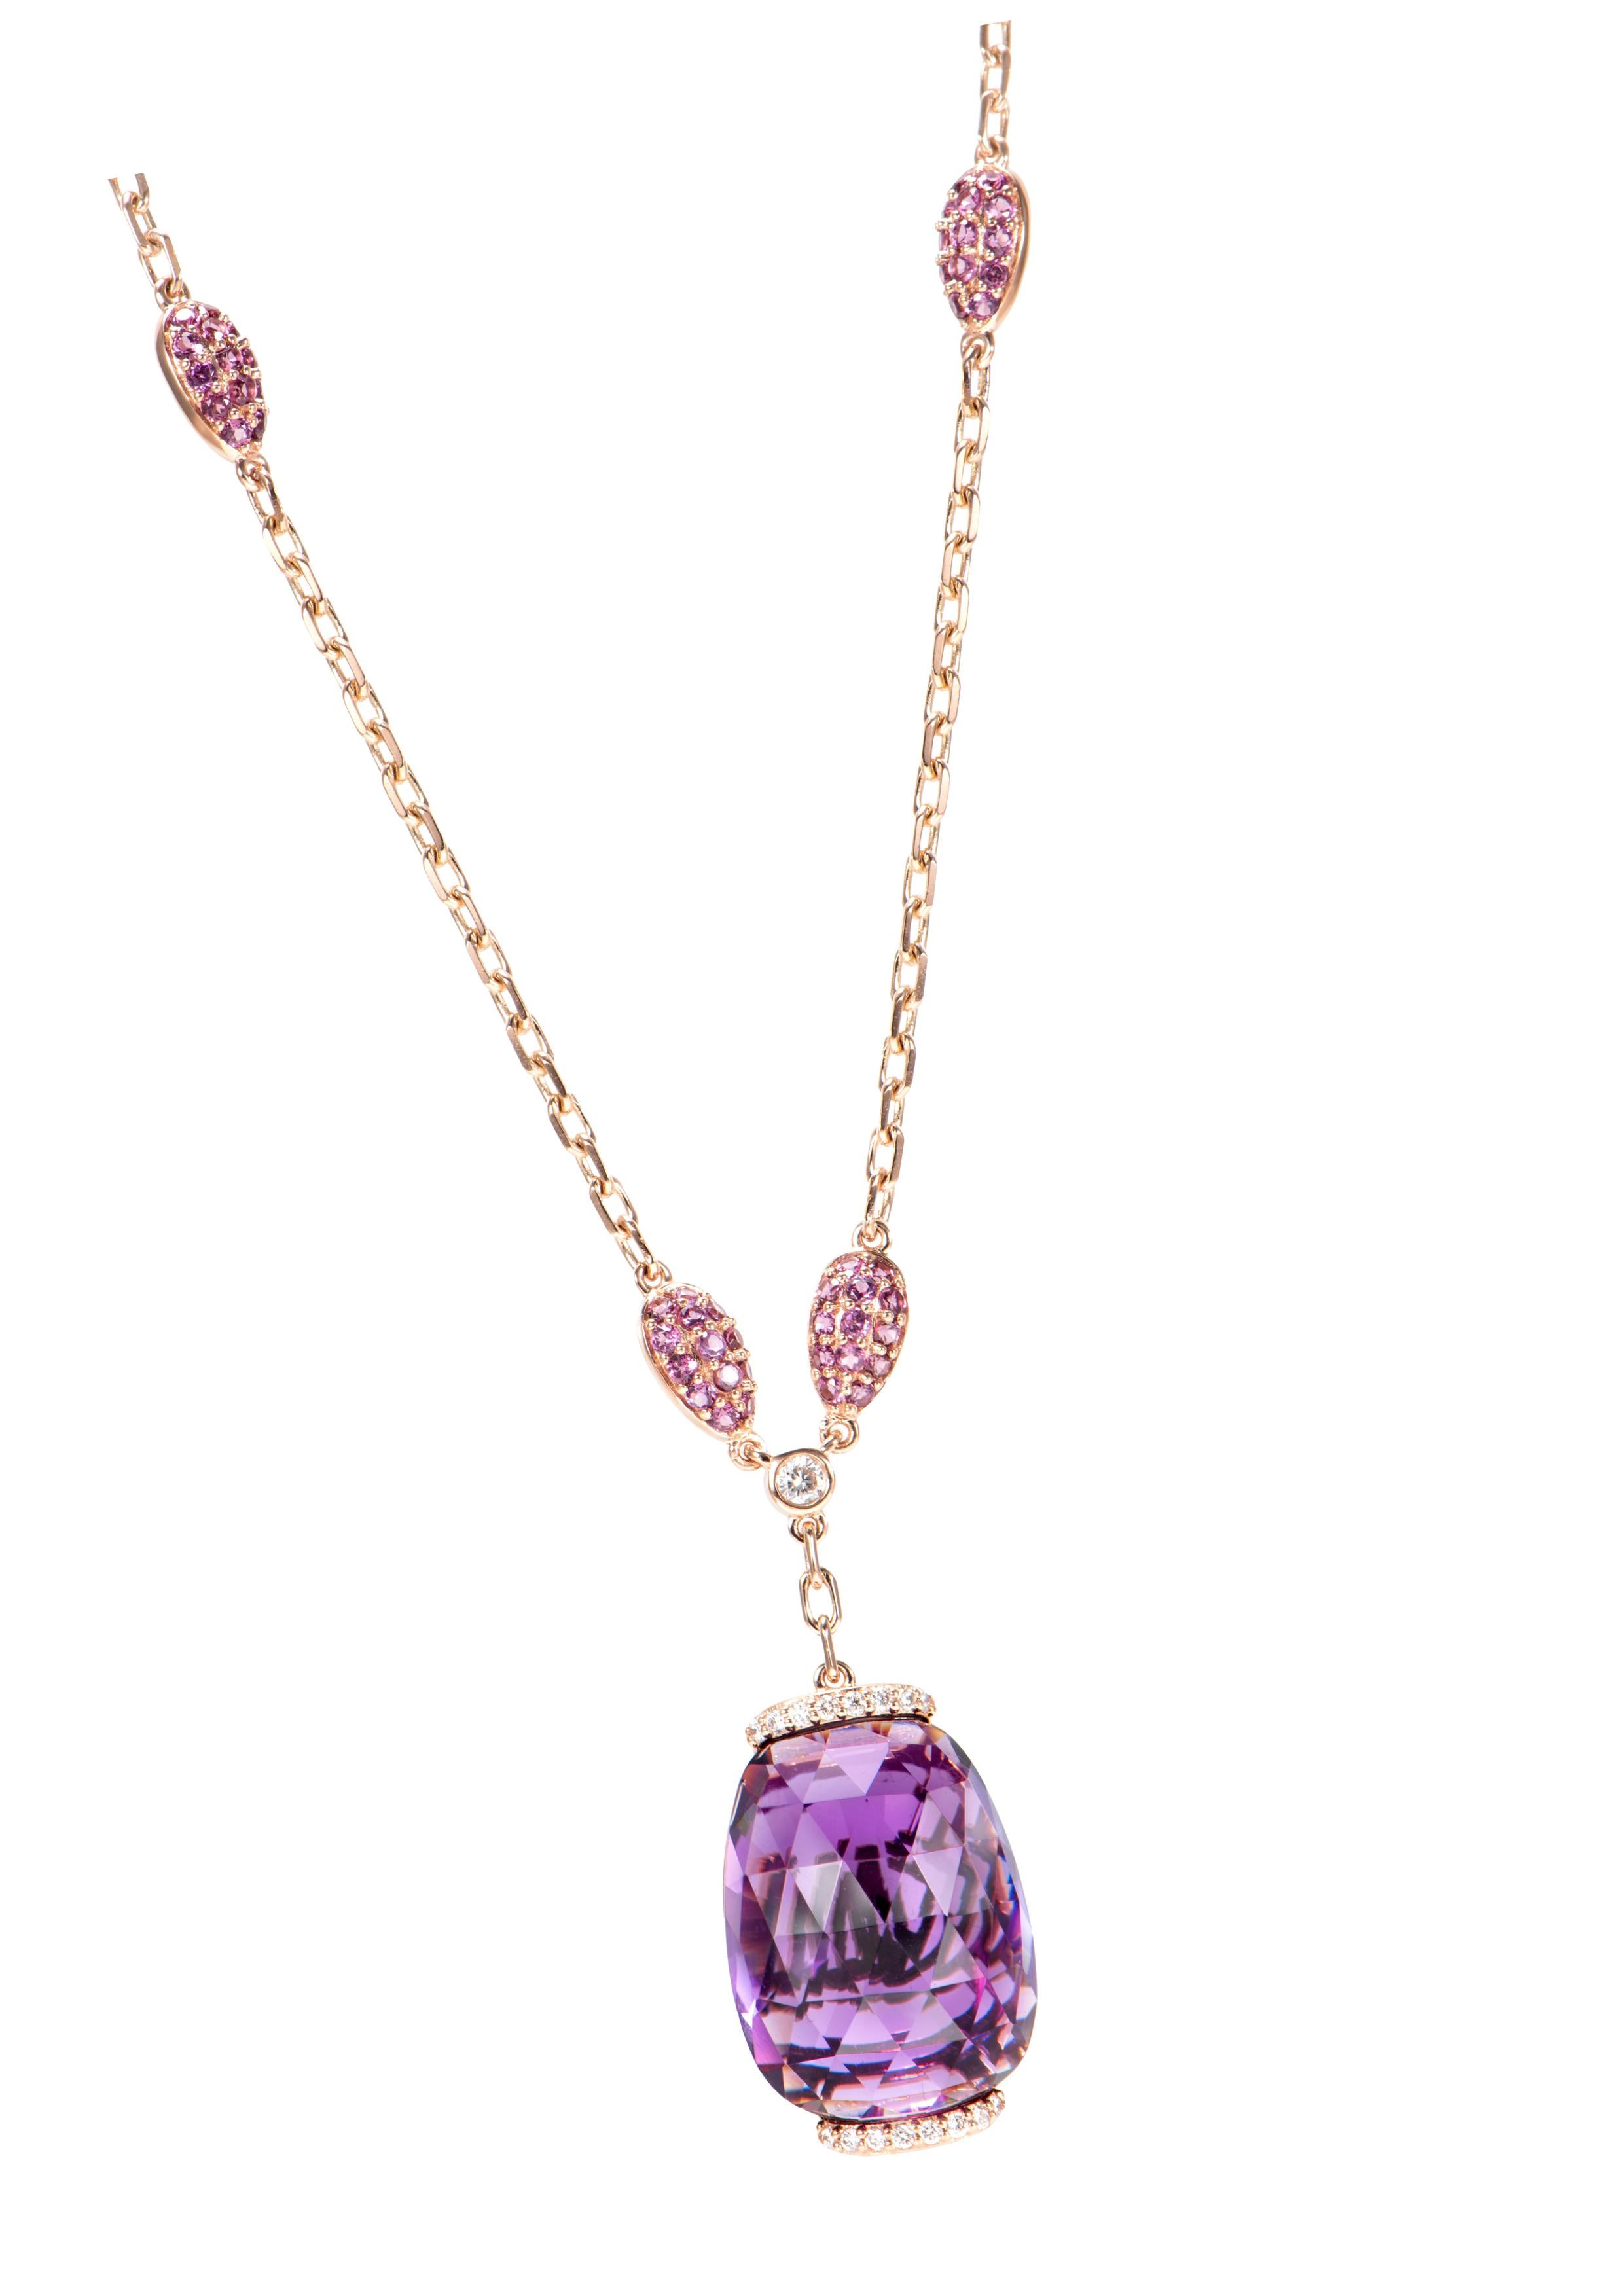 An exclusive collection of designer and unique Pendant by Sunita Nahata Fine Design.
Accented with diamonds these Pendants are made in Rose gold and present a classic yet elegant look. 

Amethyst Pendant with Rhodolite and White Diamond in 18 Karat